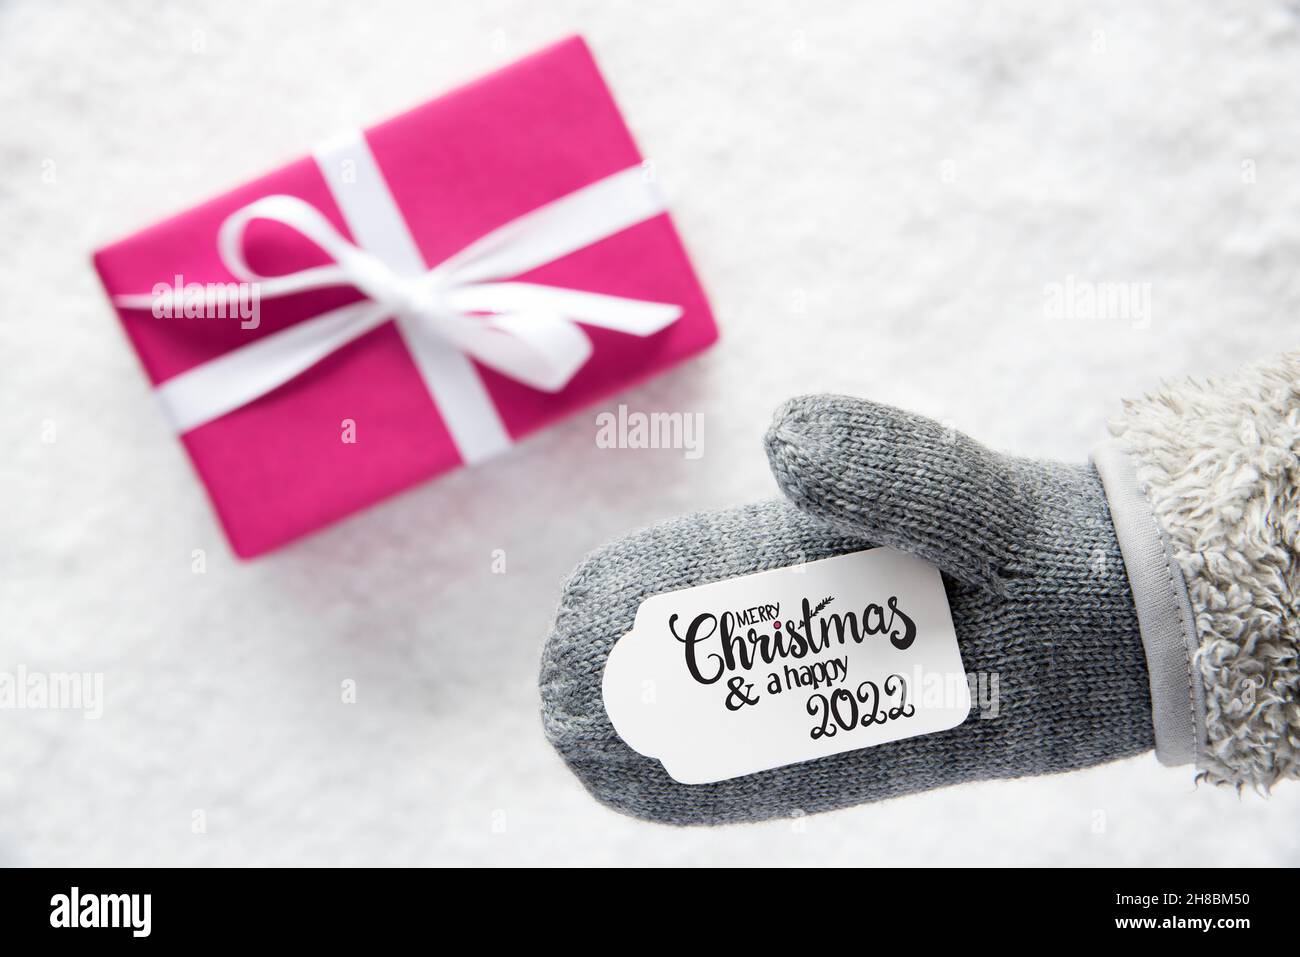 Gray Glove, Pink Gift, Label, Snow, Merry Christmas And A Happy 2022 Stock Photo